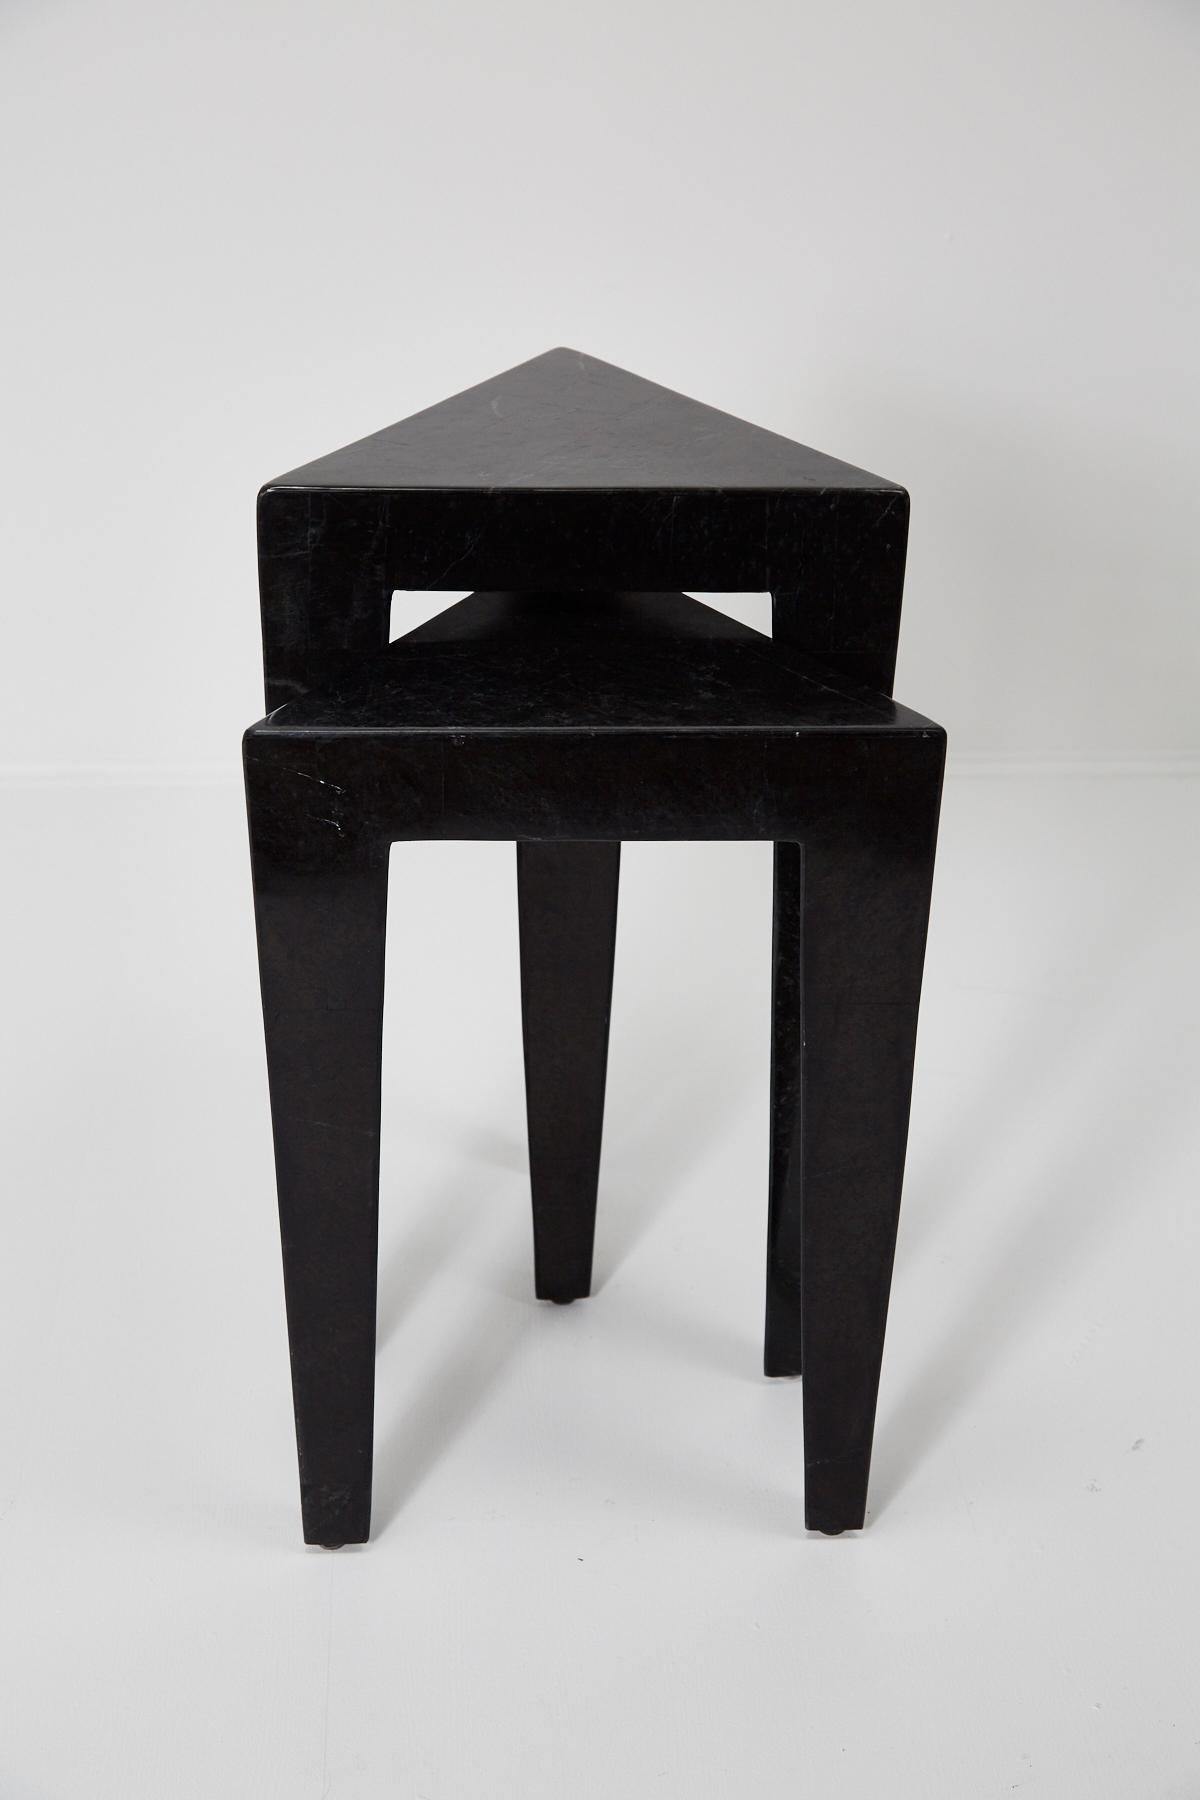 Black Tessellated Stone Triangular Nesting Tables, 1990s For Sale 6